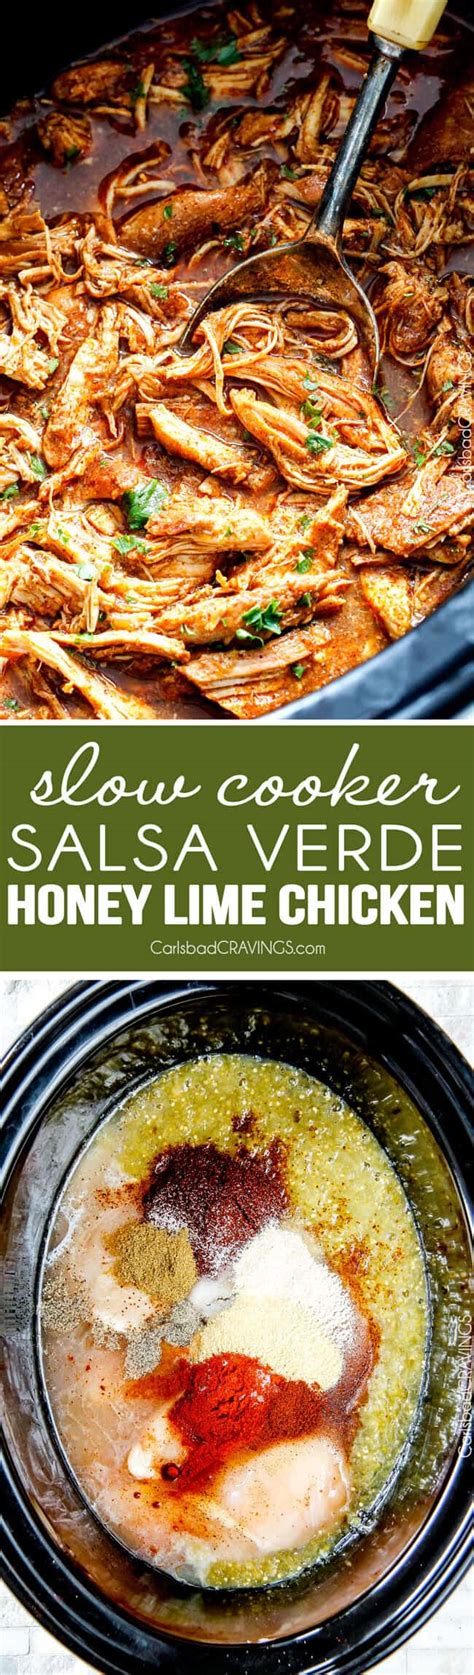 This salsa verde chicken is tangy, flavorful with just the right amount of kick. Slow Cooker Salsa Verde Honey Lime Chicken (Tacos ...